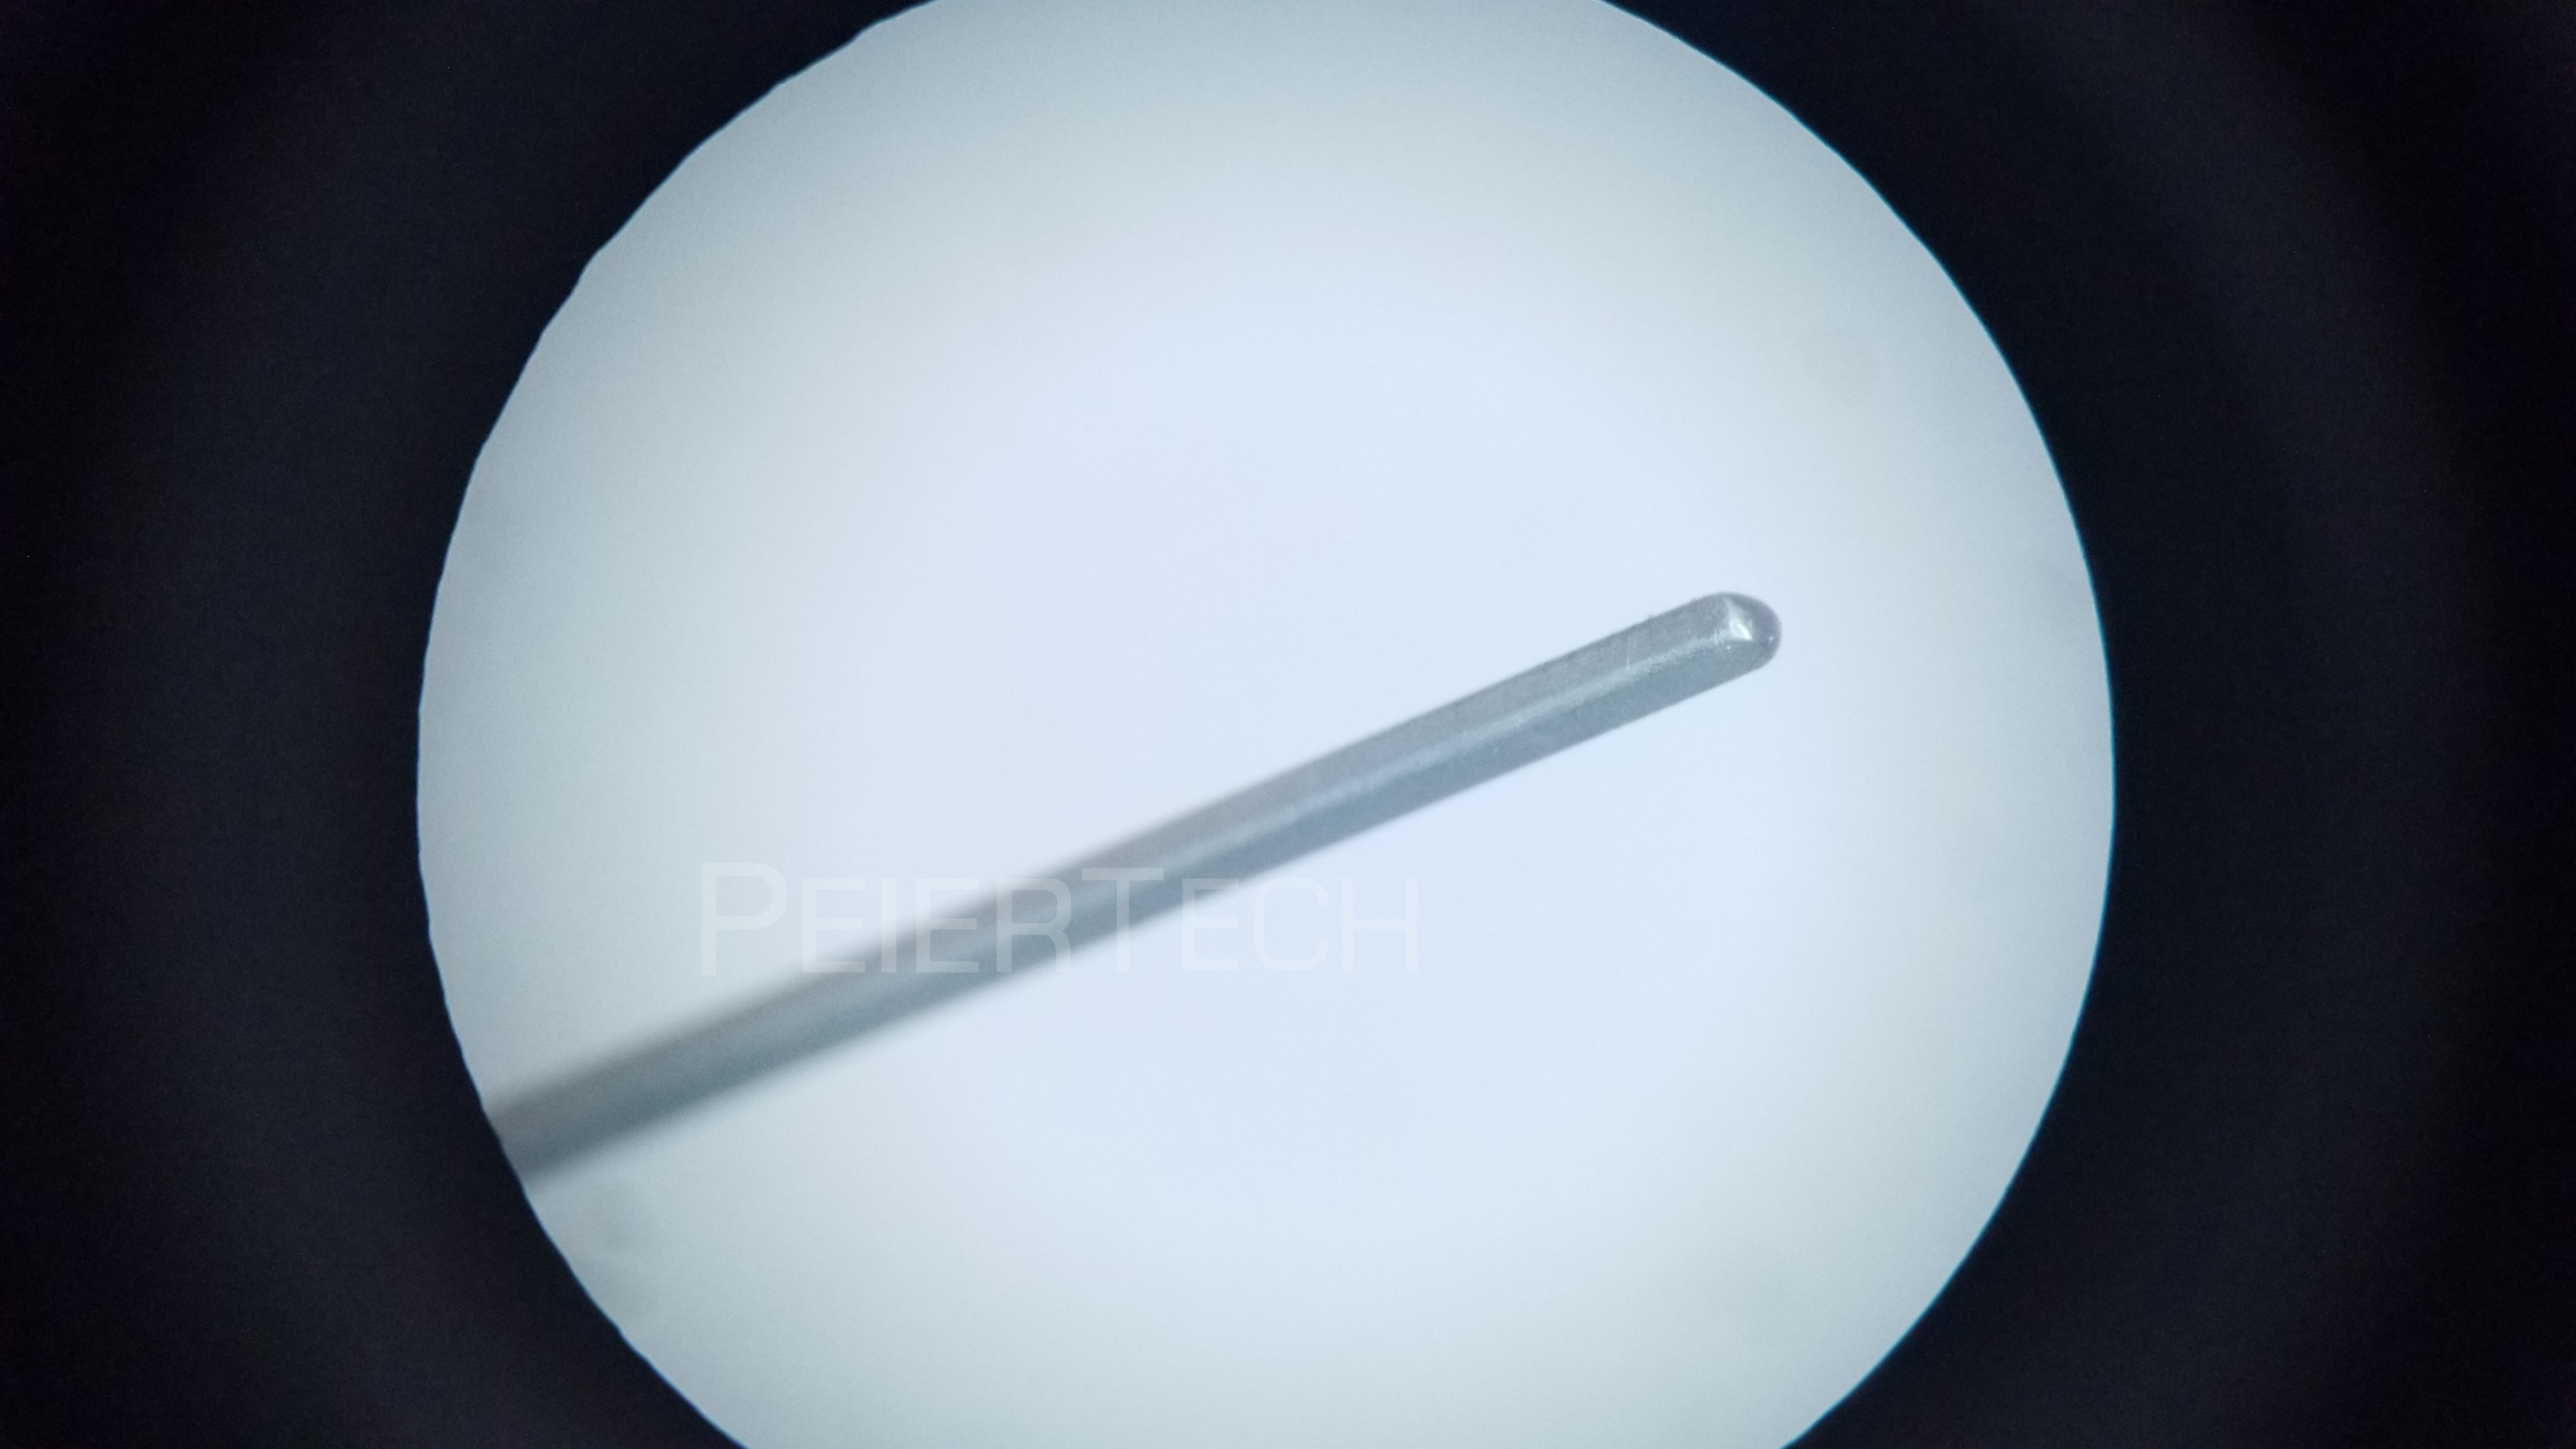 Nitinol Medical Nitinol Wire Peiertech produces special NiTi alloy products for medical devices. 